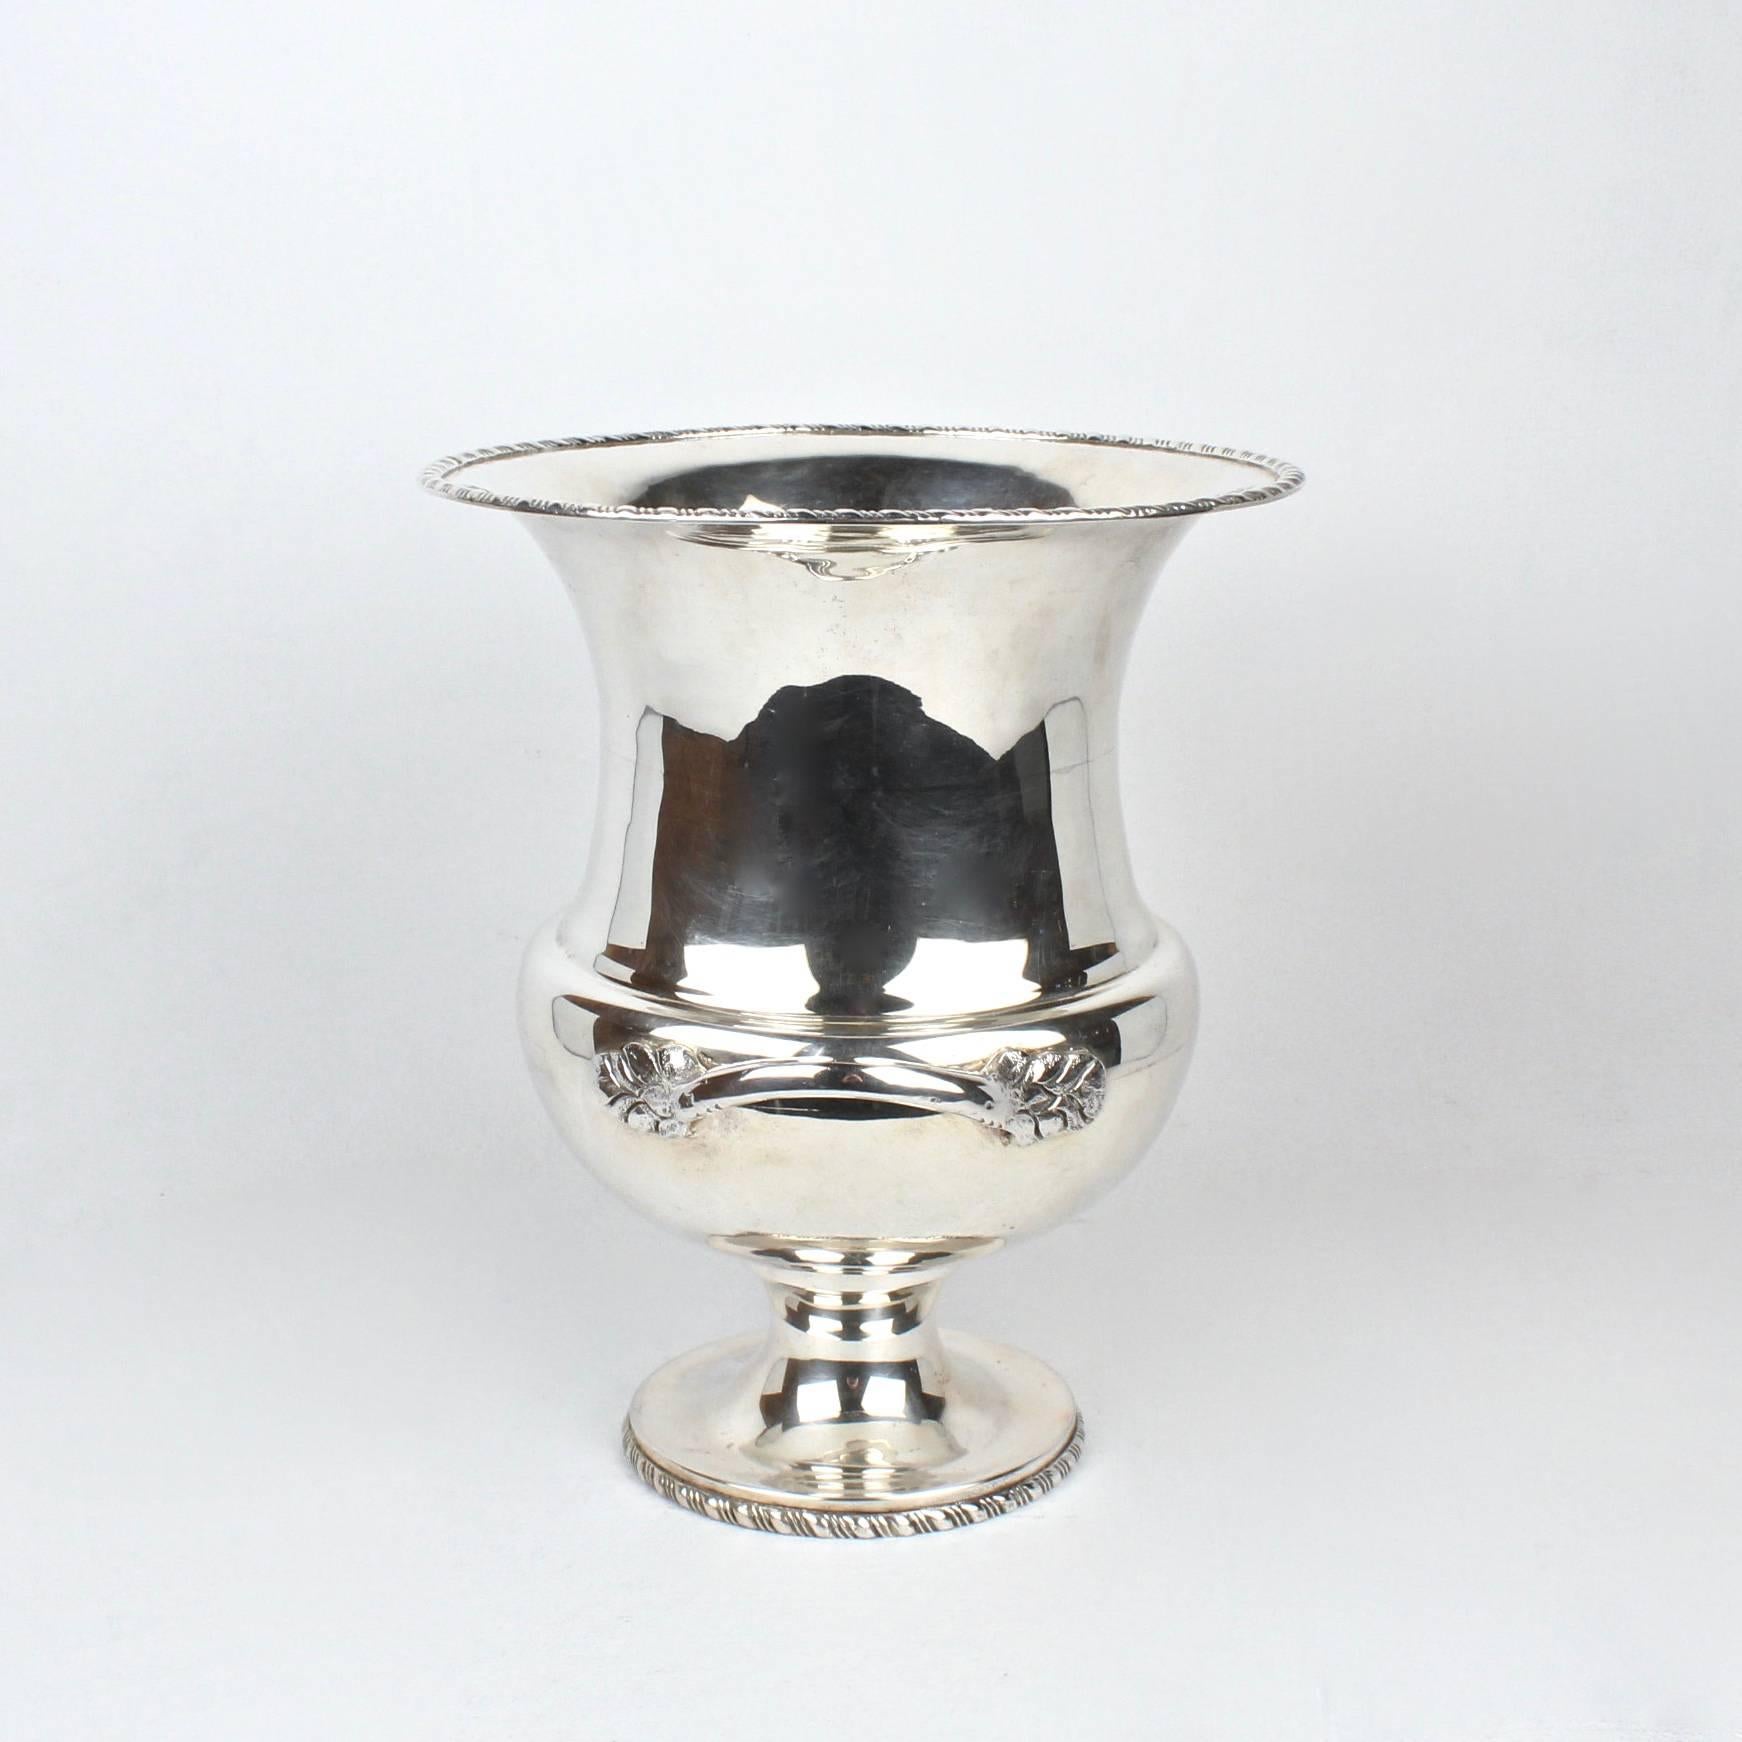 A large (and heavy) solid Mexican sterling silver champagne cooler or wine bucket.

As with much of Mexican silver, this champagne cooler has a slightly rustic feel. It has several wonderful signs of hand construction, including two visible seams